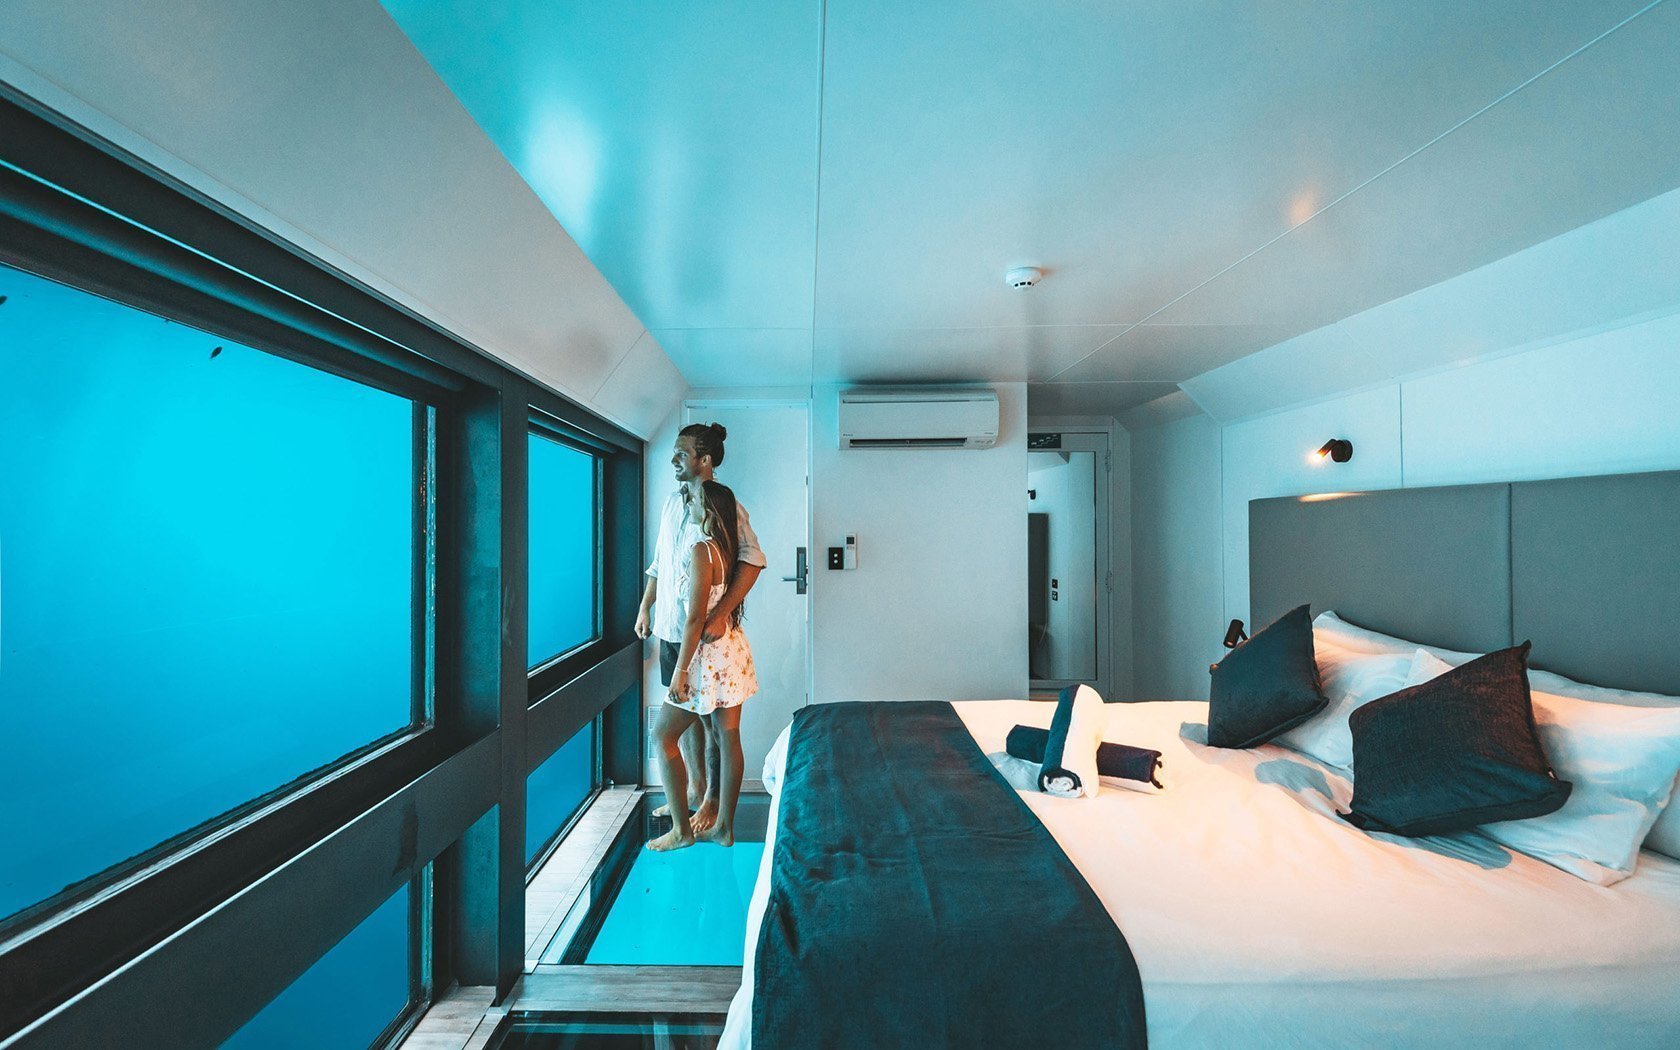 REEFSUITES
Australia's first underwater accommodation on The Great Barrier Reef